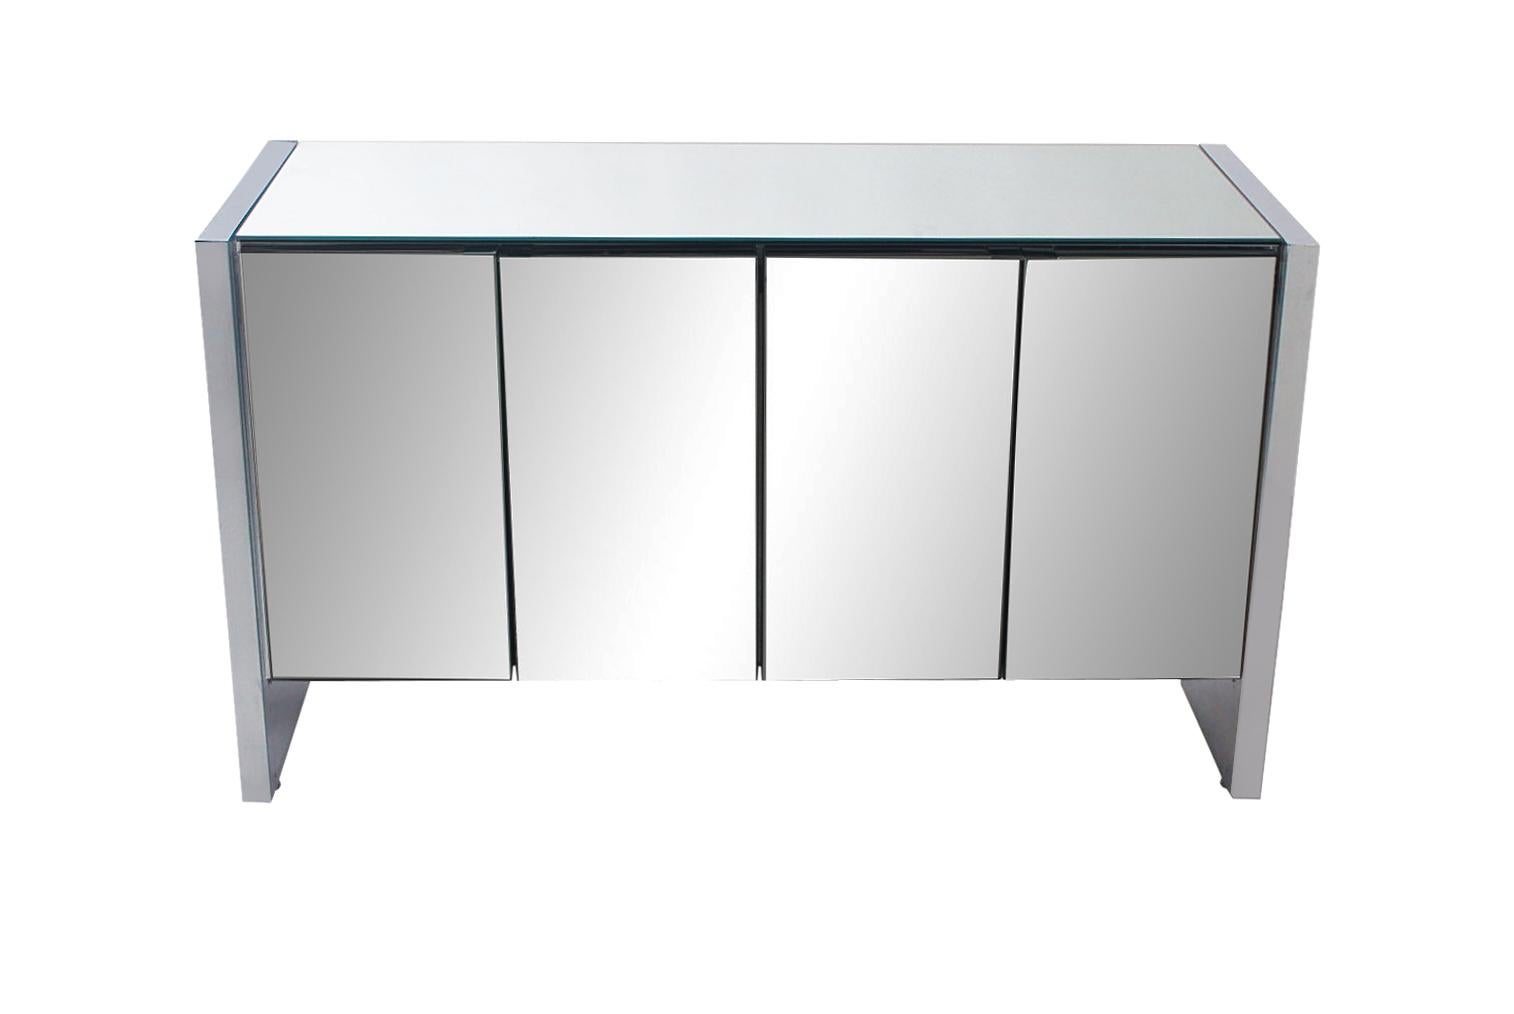 A sleek minimalist cabinet by Ello Furniture circa 1970's. It features mirror polished chrome sides, mirrored doors, mirrored top, and tons of storage. Clean and ready to use.